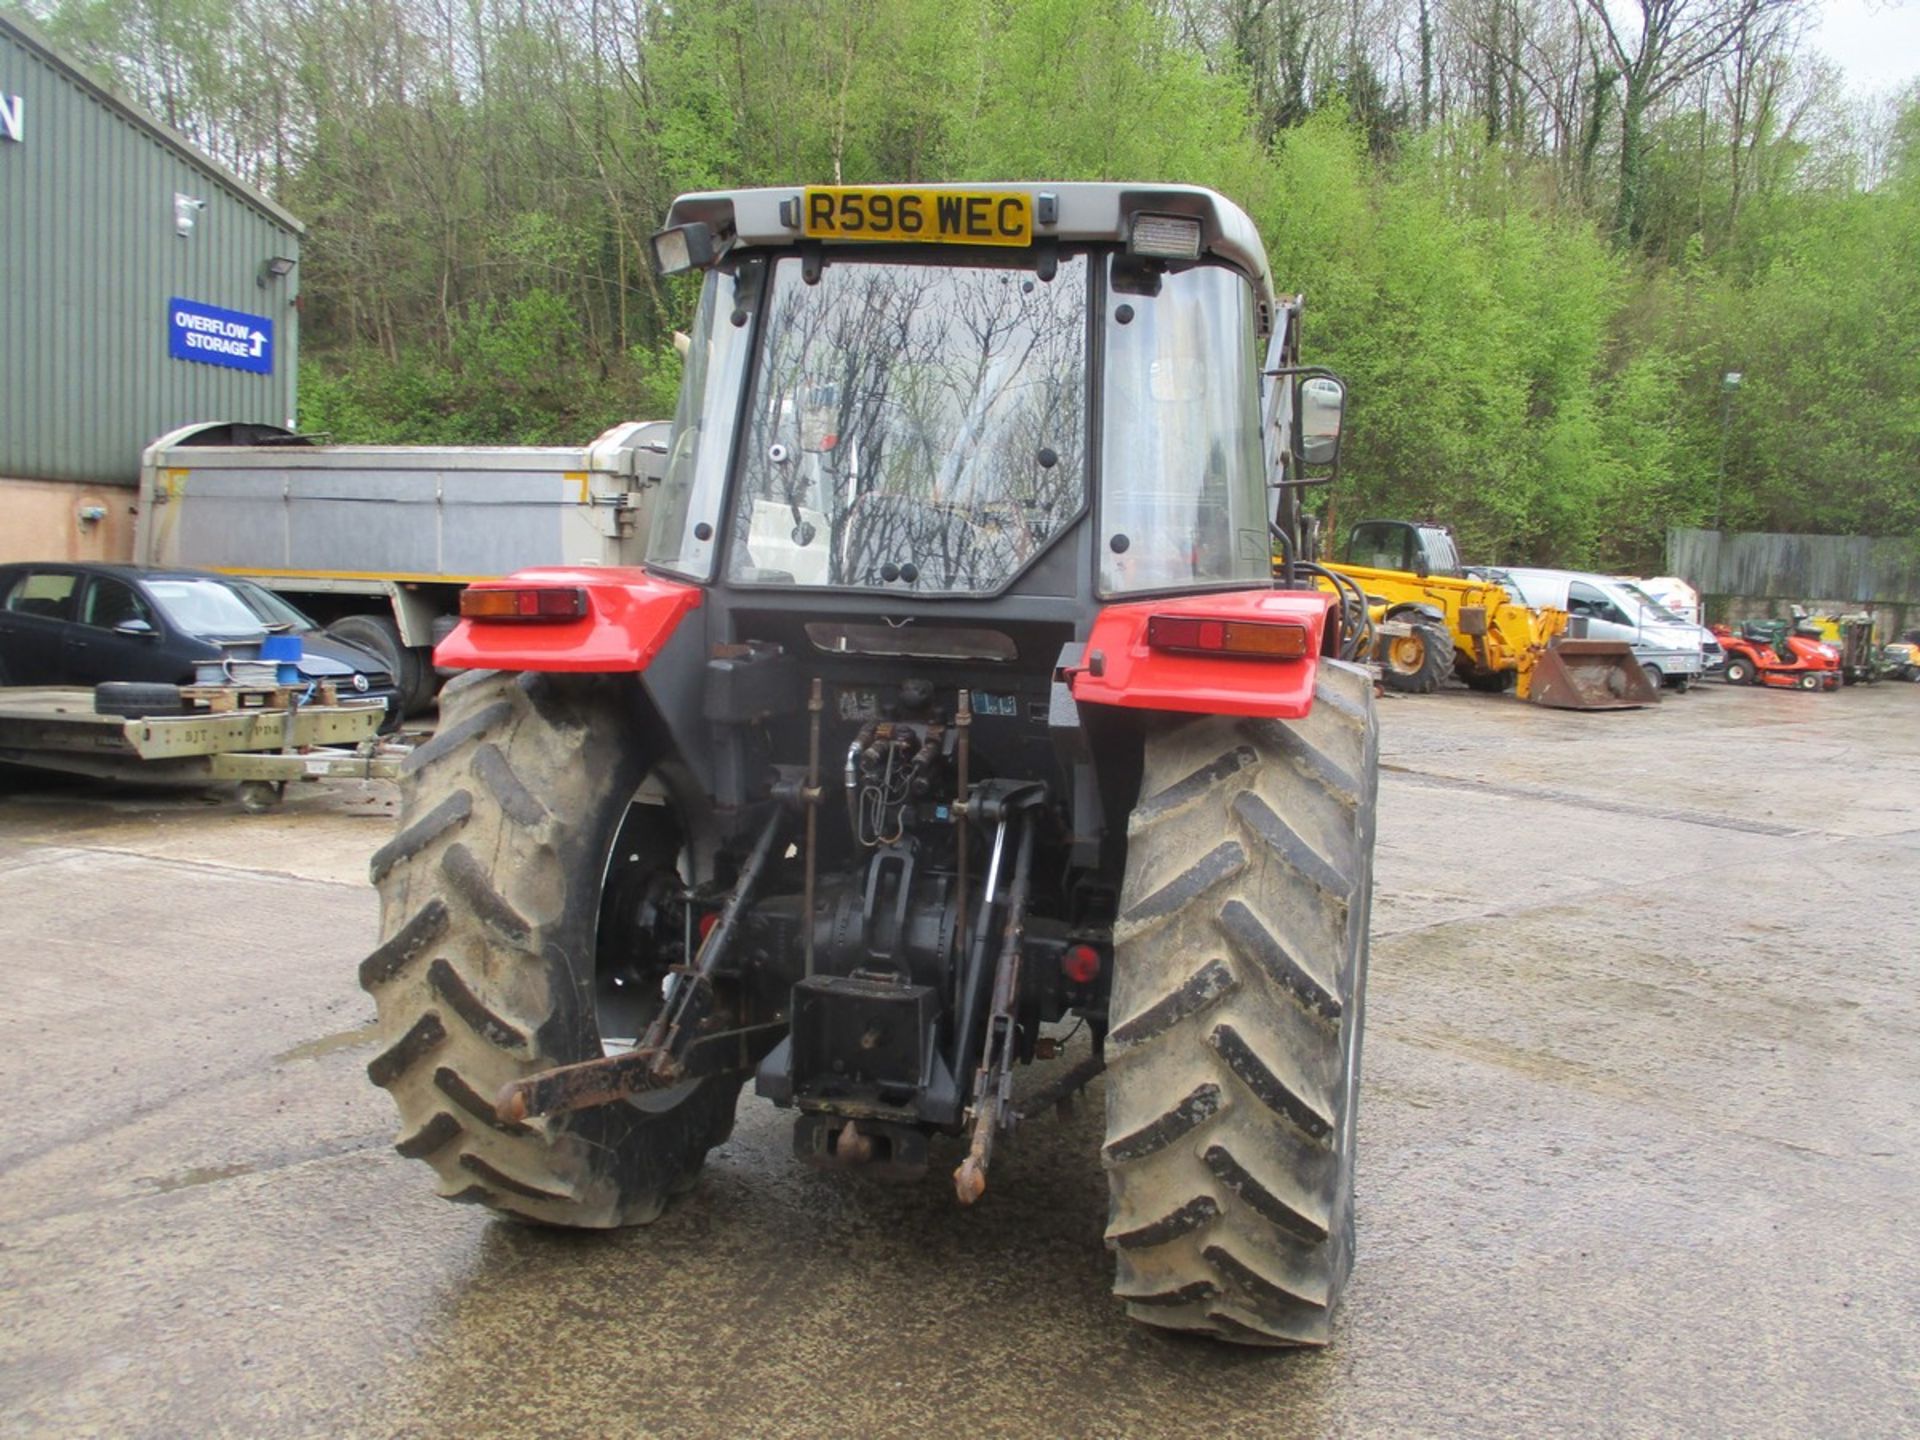 MASSEY FERGUSON 4245 4WD TRACTOR R596 WEC C.W MCCONNEL LOADER SHOWING 4945HRS - Image 7 of 9